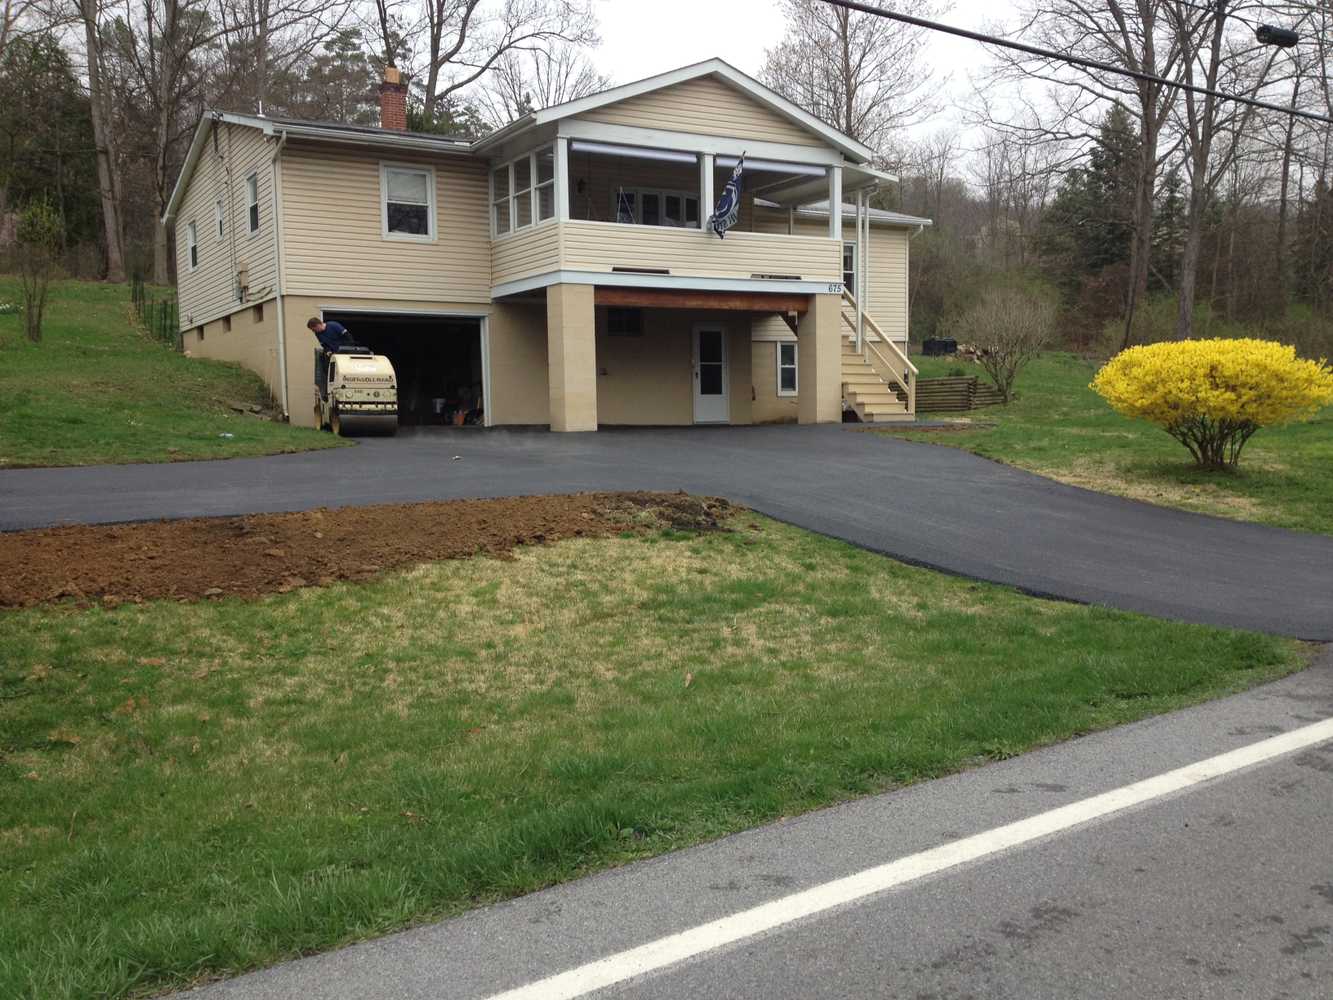 A1 Paving Of Altoona Inc Project